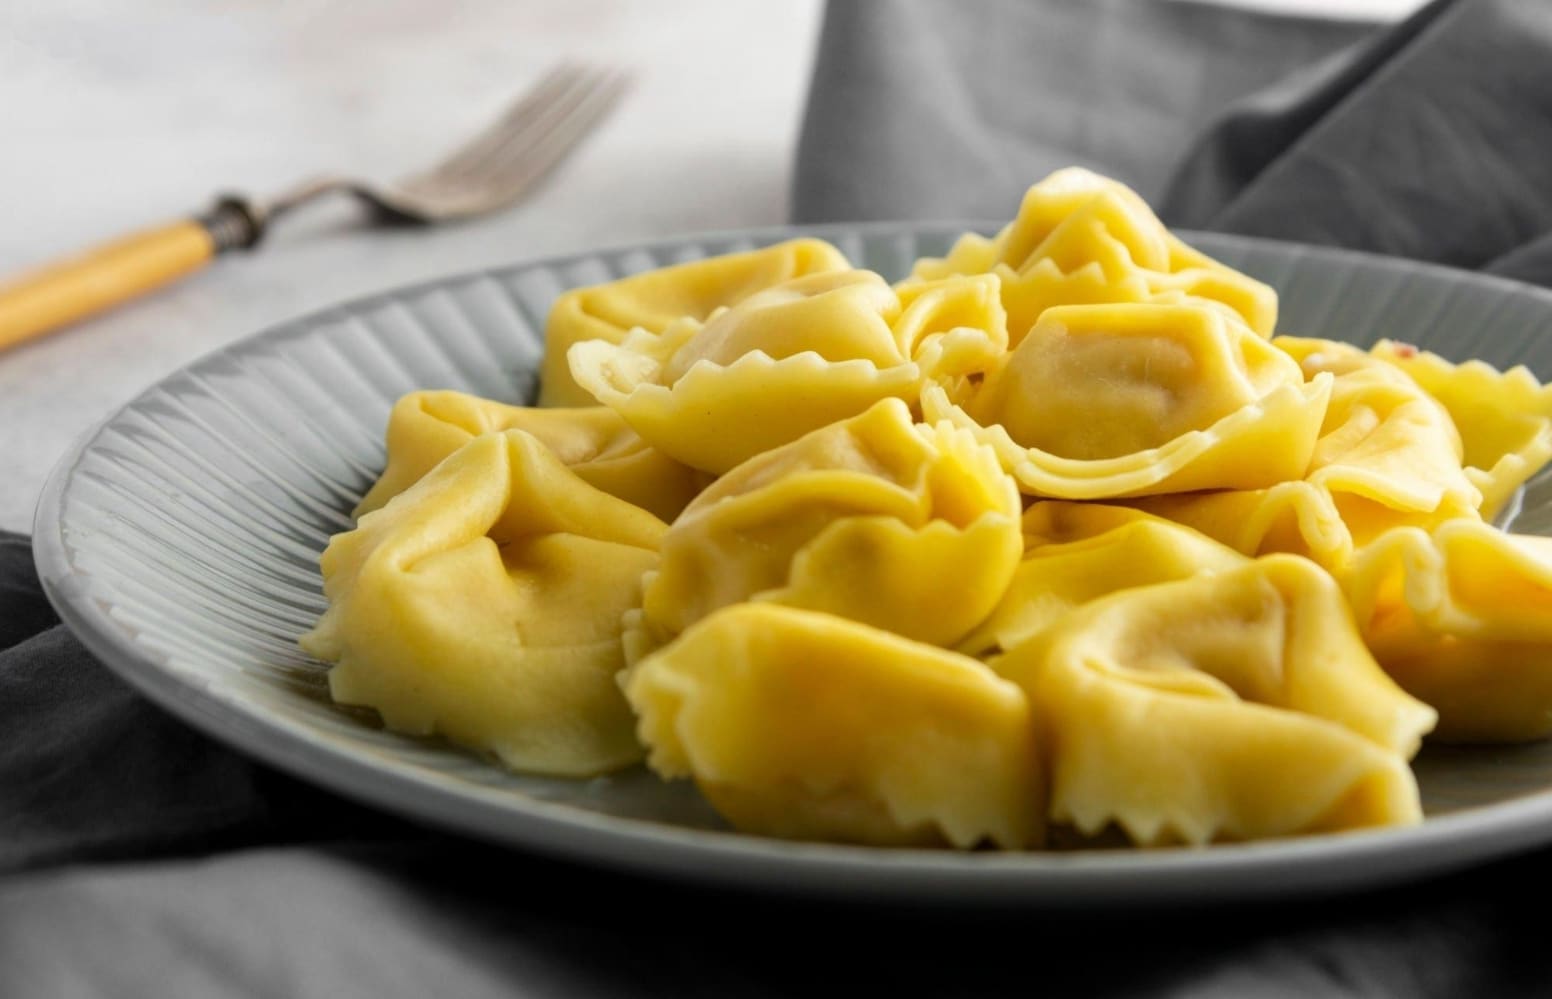 What is Usually in Tortellini?